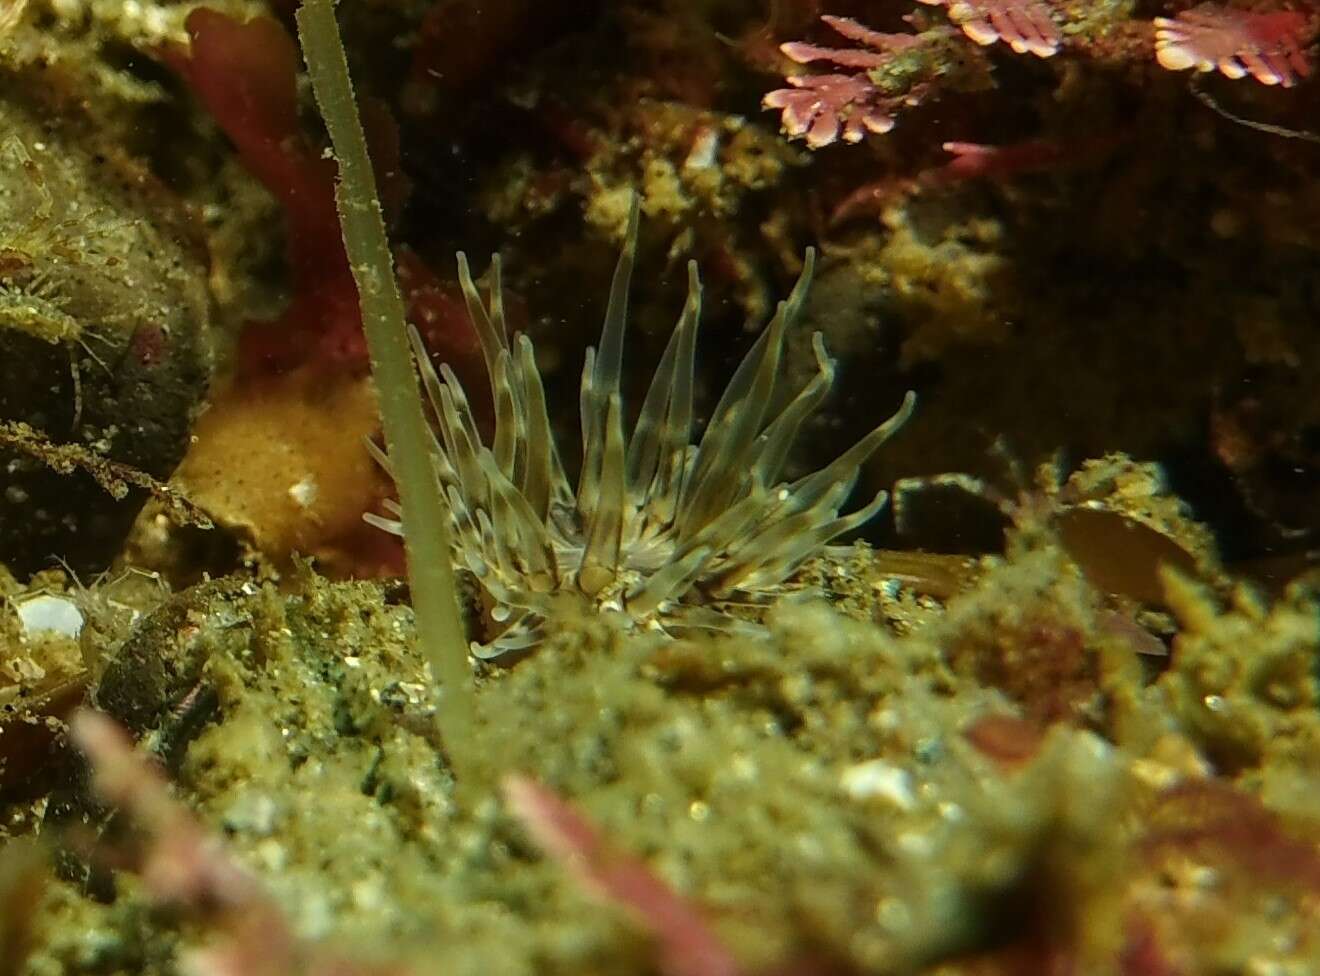 Image of wormy anemone